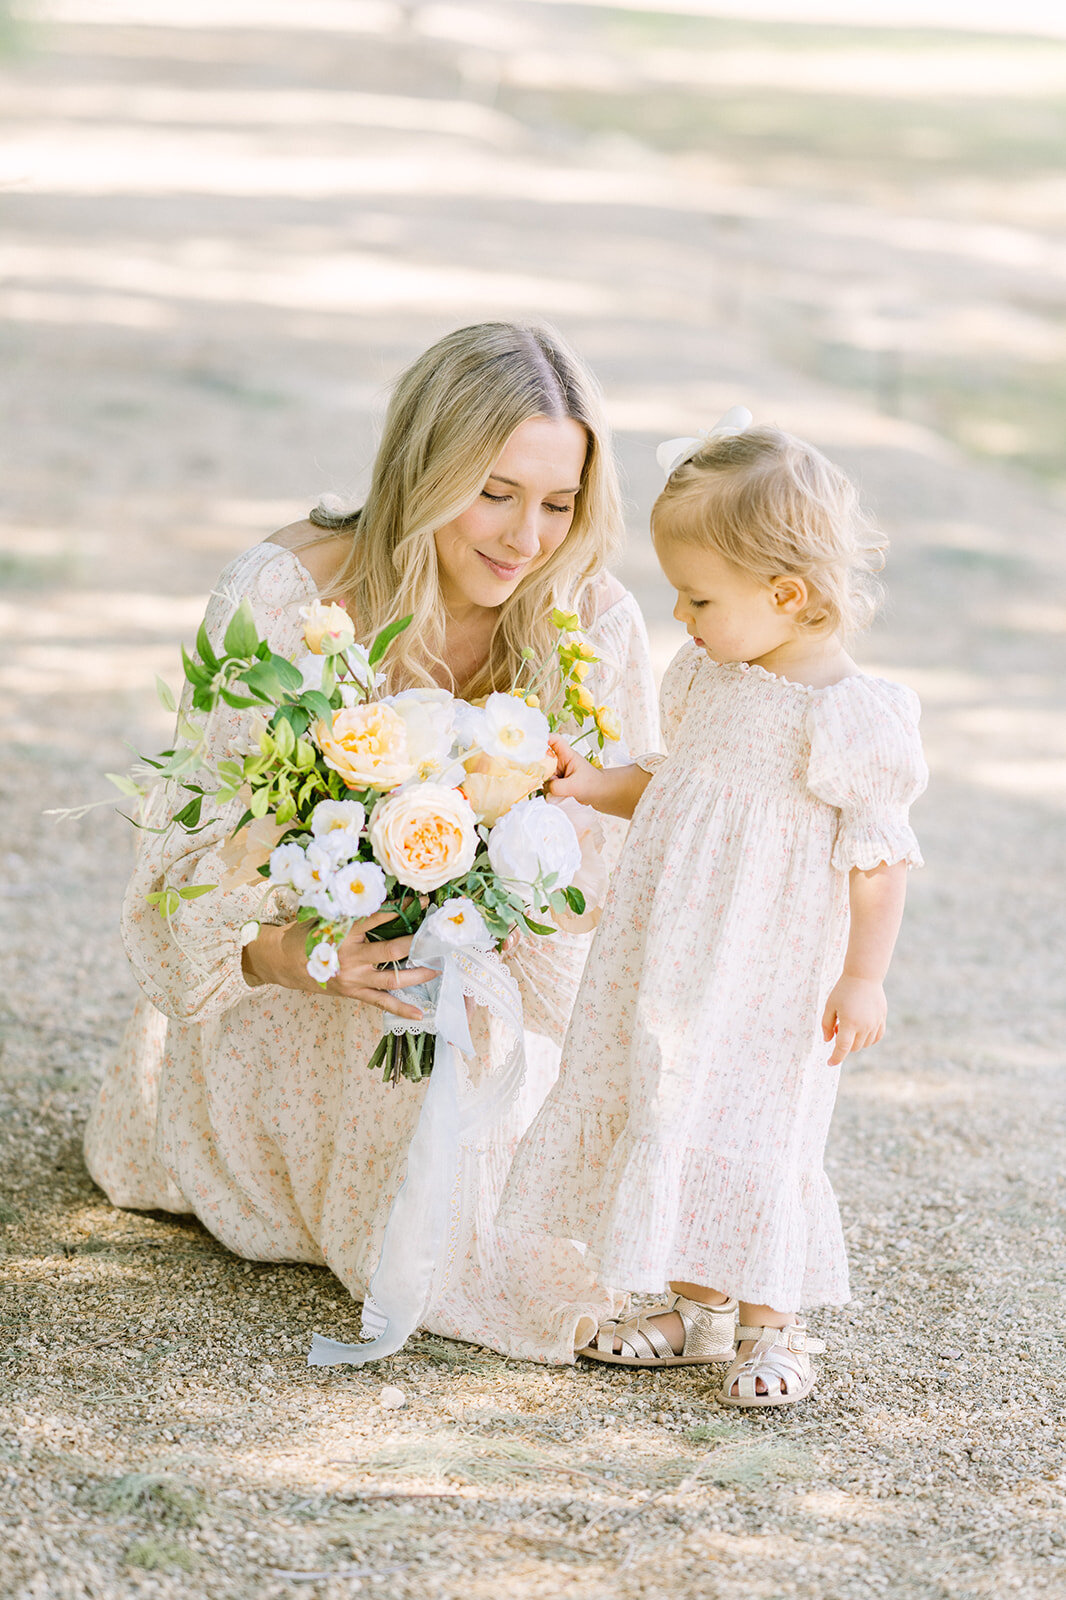 Mom and baby dressed in matching dresses admire a peach colored bouquet.